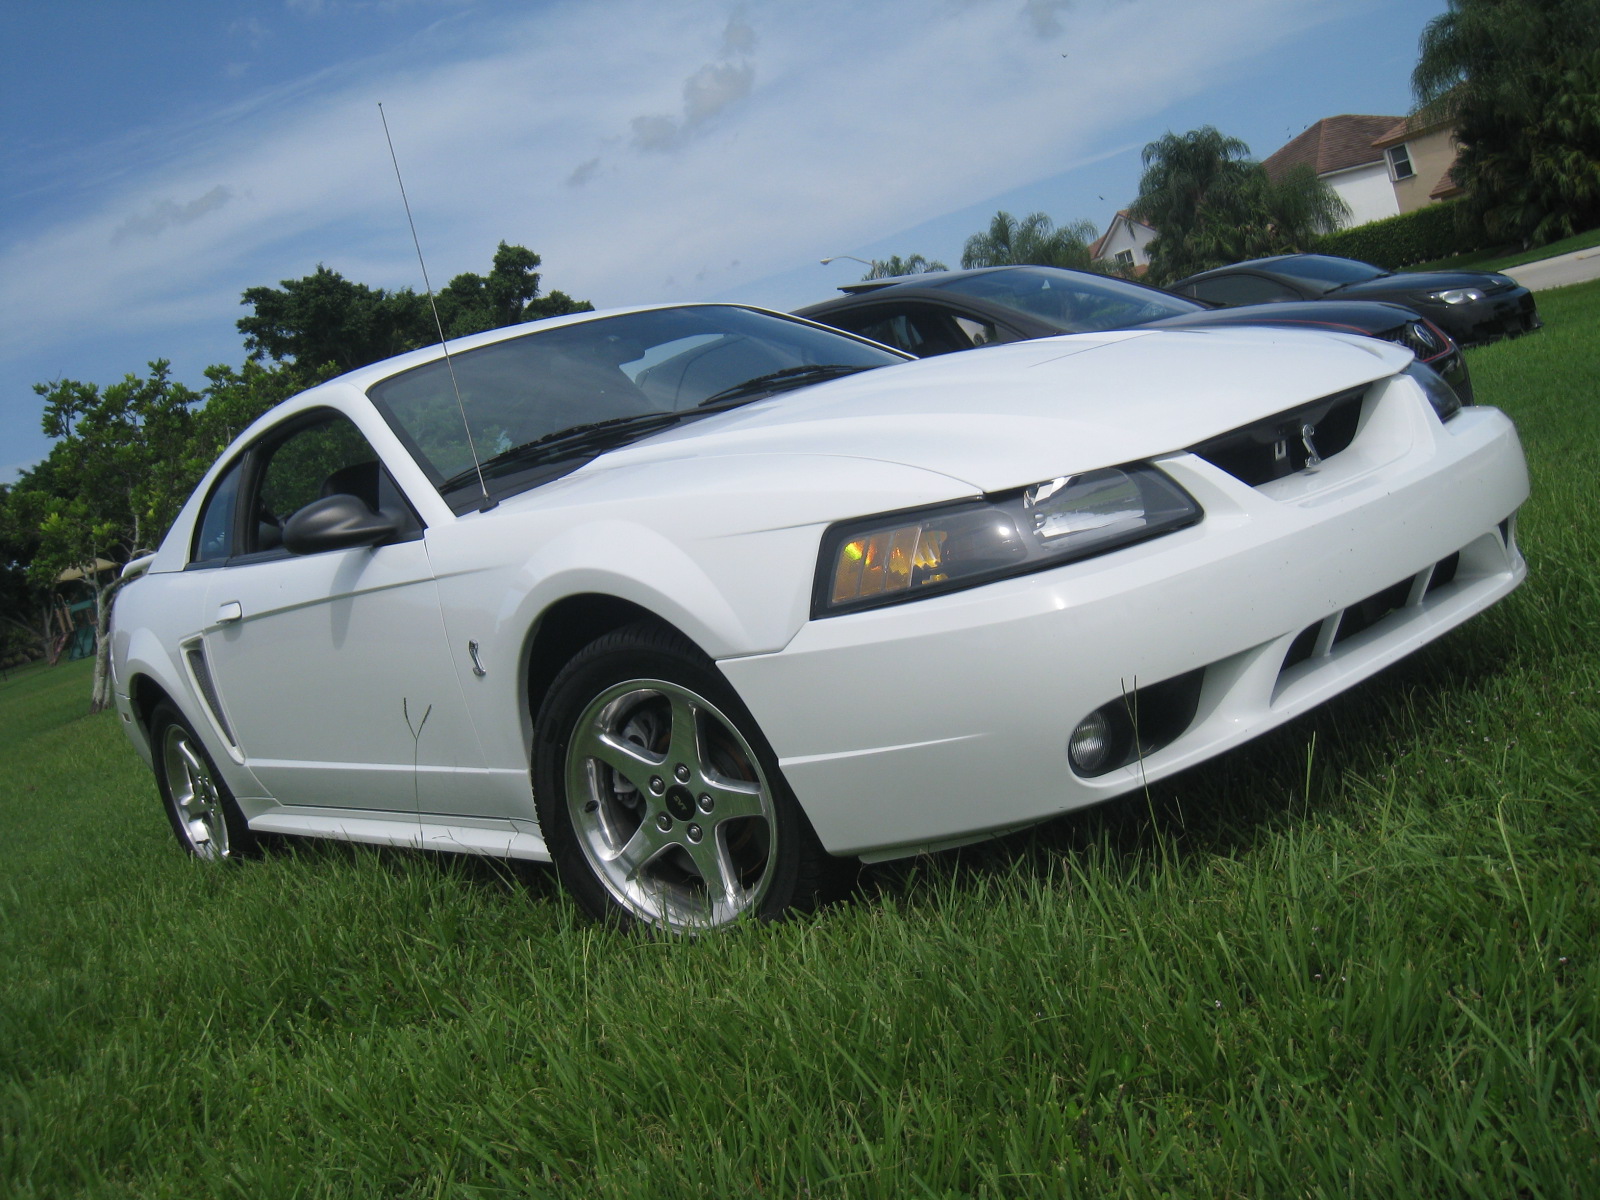 2001 Ford mustang cobra svt coupe specs #4